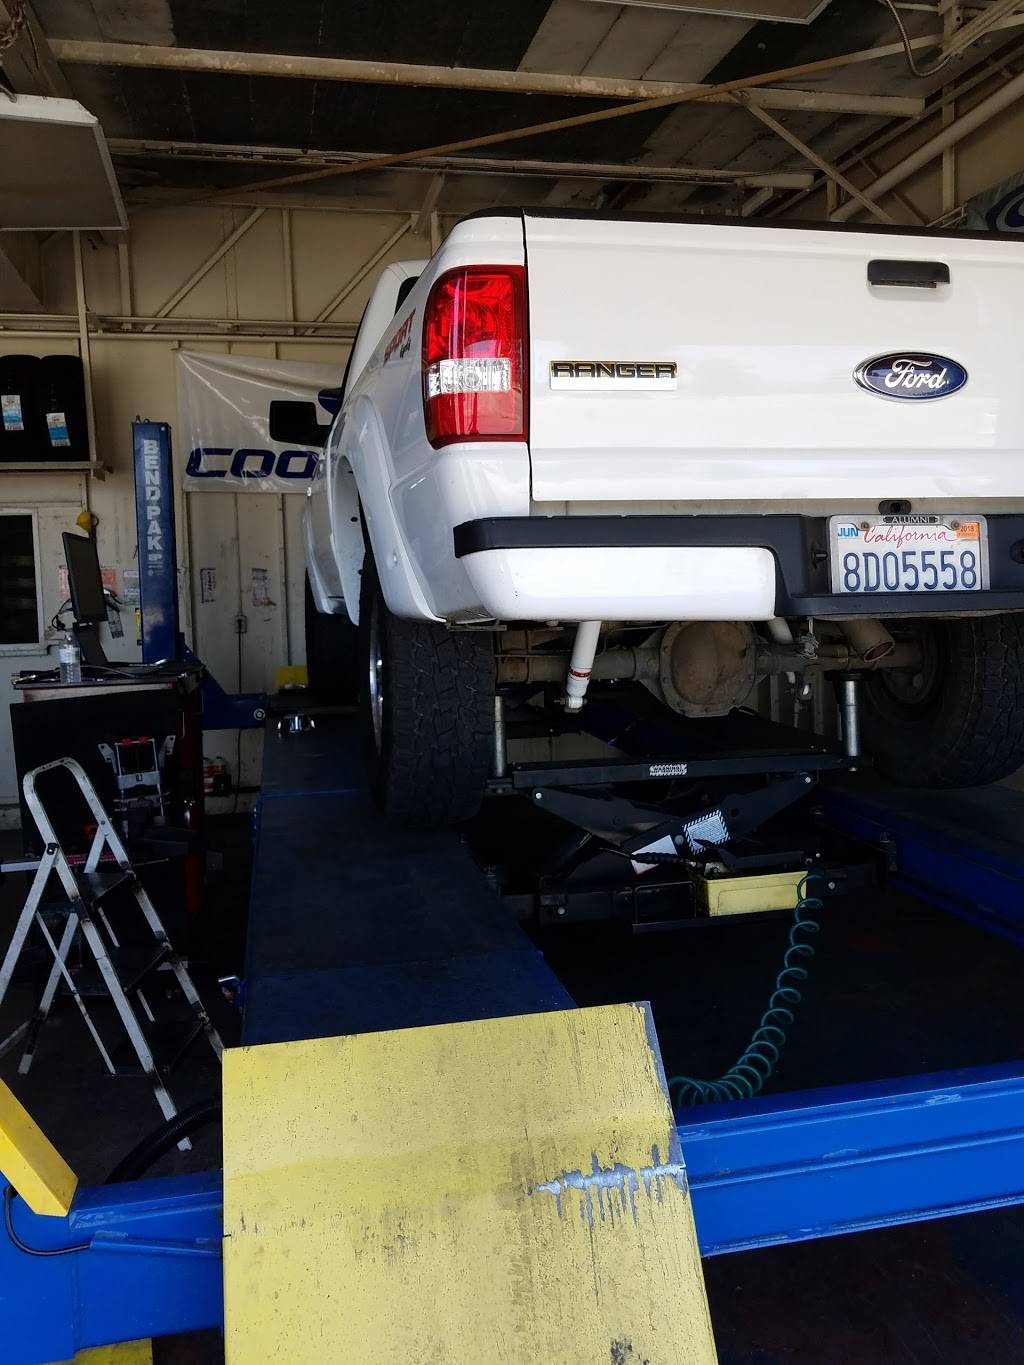 Pro Tires | 7501 S Union Ave #7401, Bakersfield, CA 93307 | Phone: (661) 381-7560